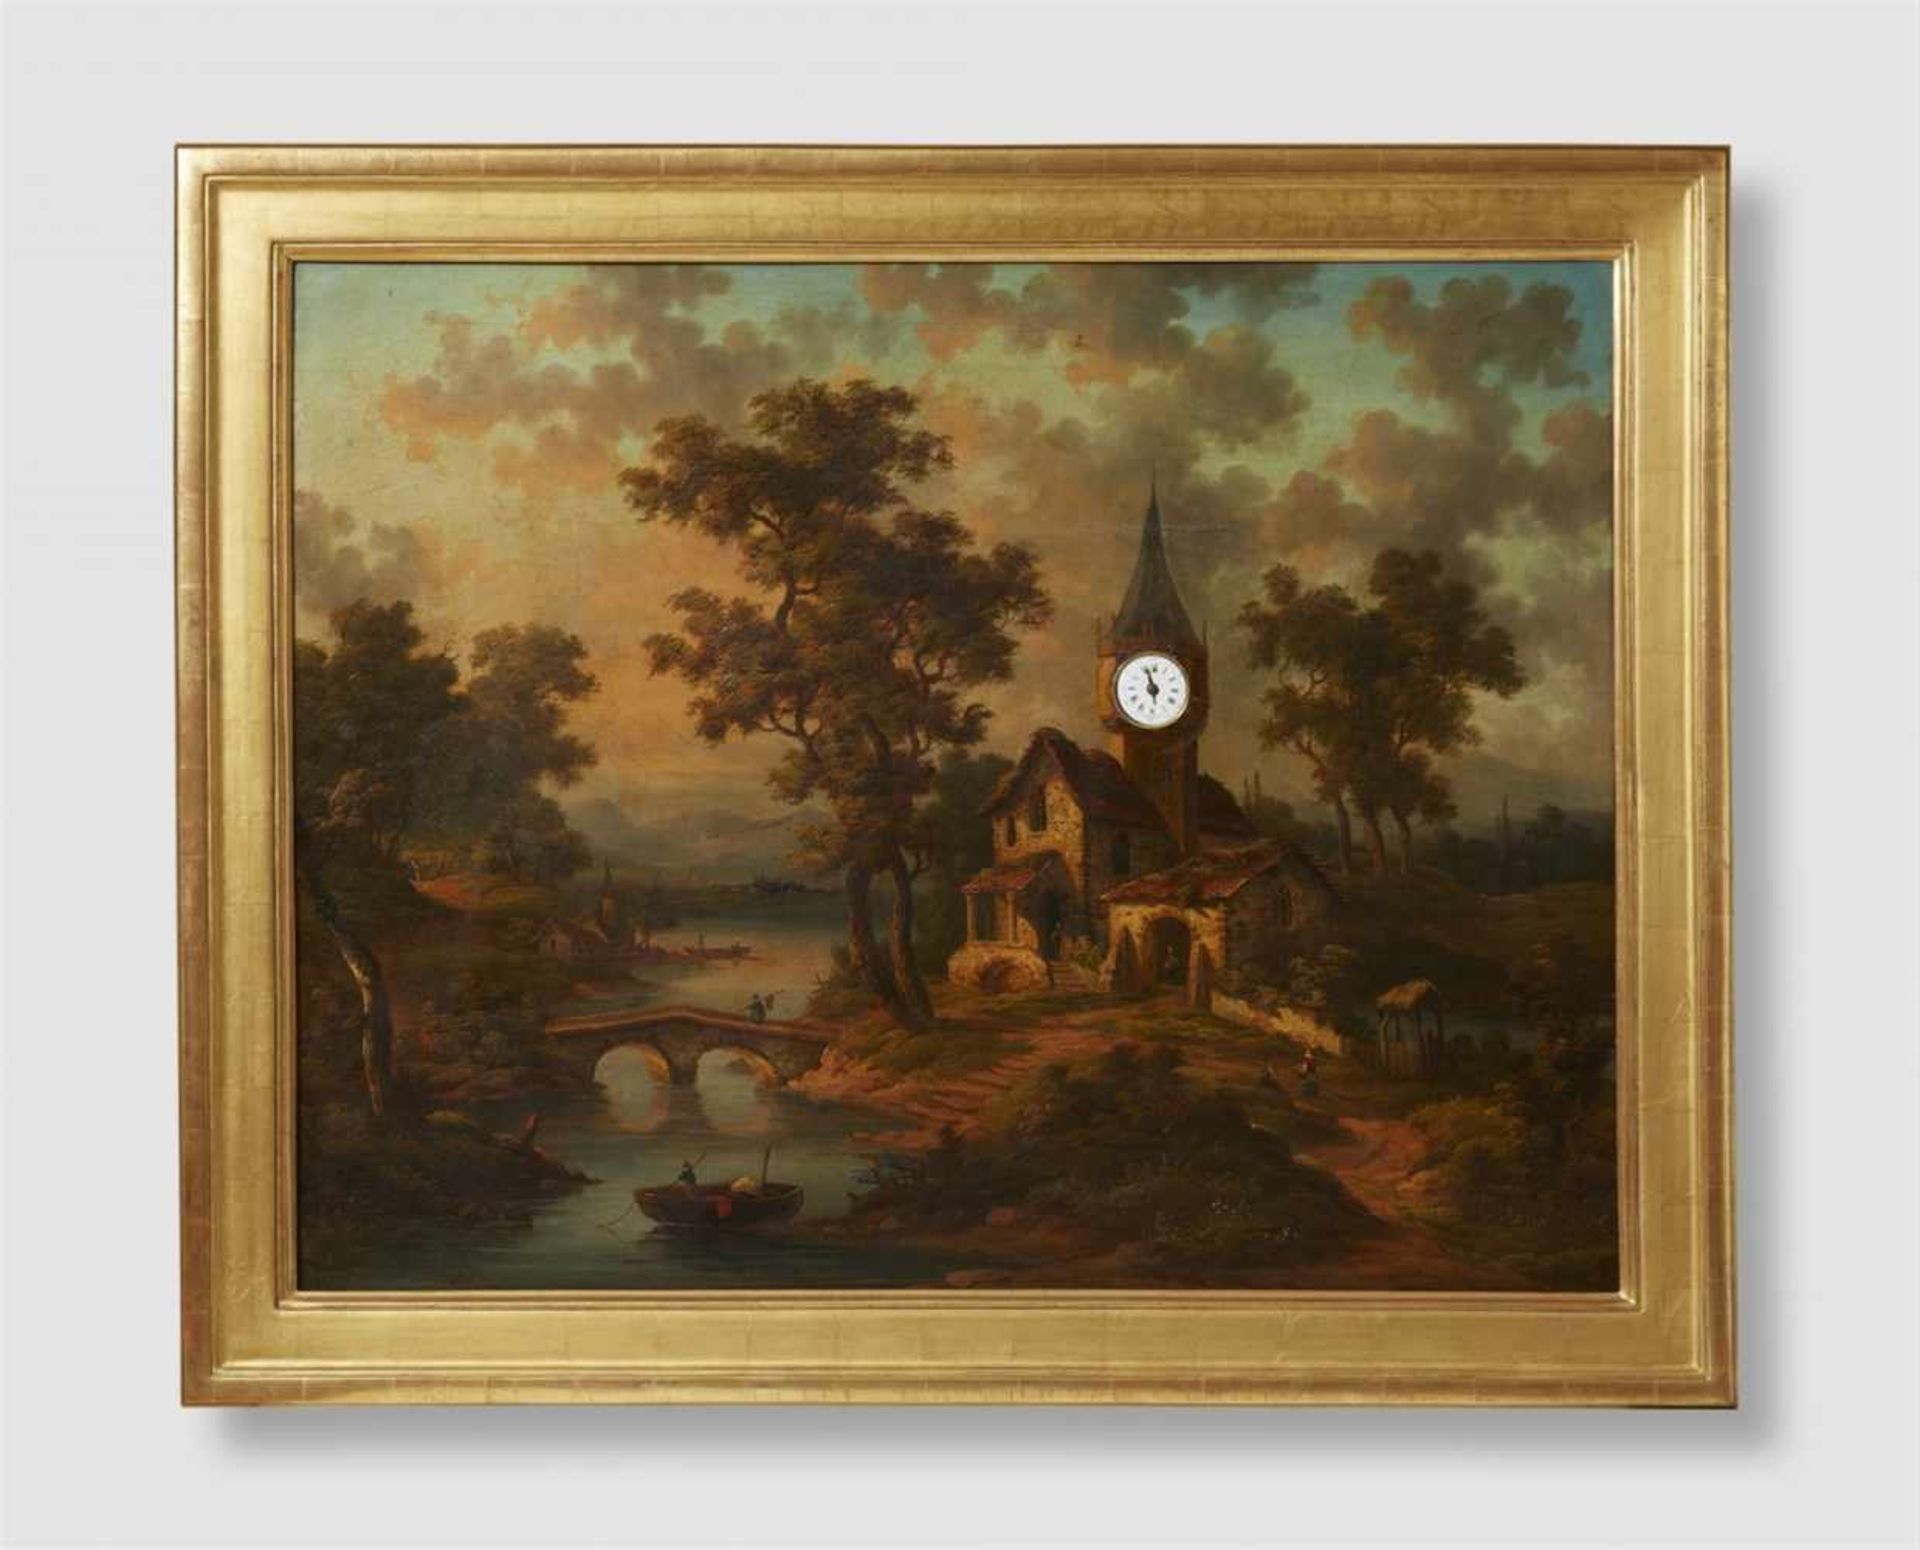 A French picture clock with a Romantic landscapeOil on canvas in a giltwood frame. 8-day movement